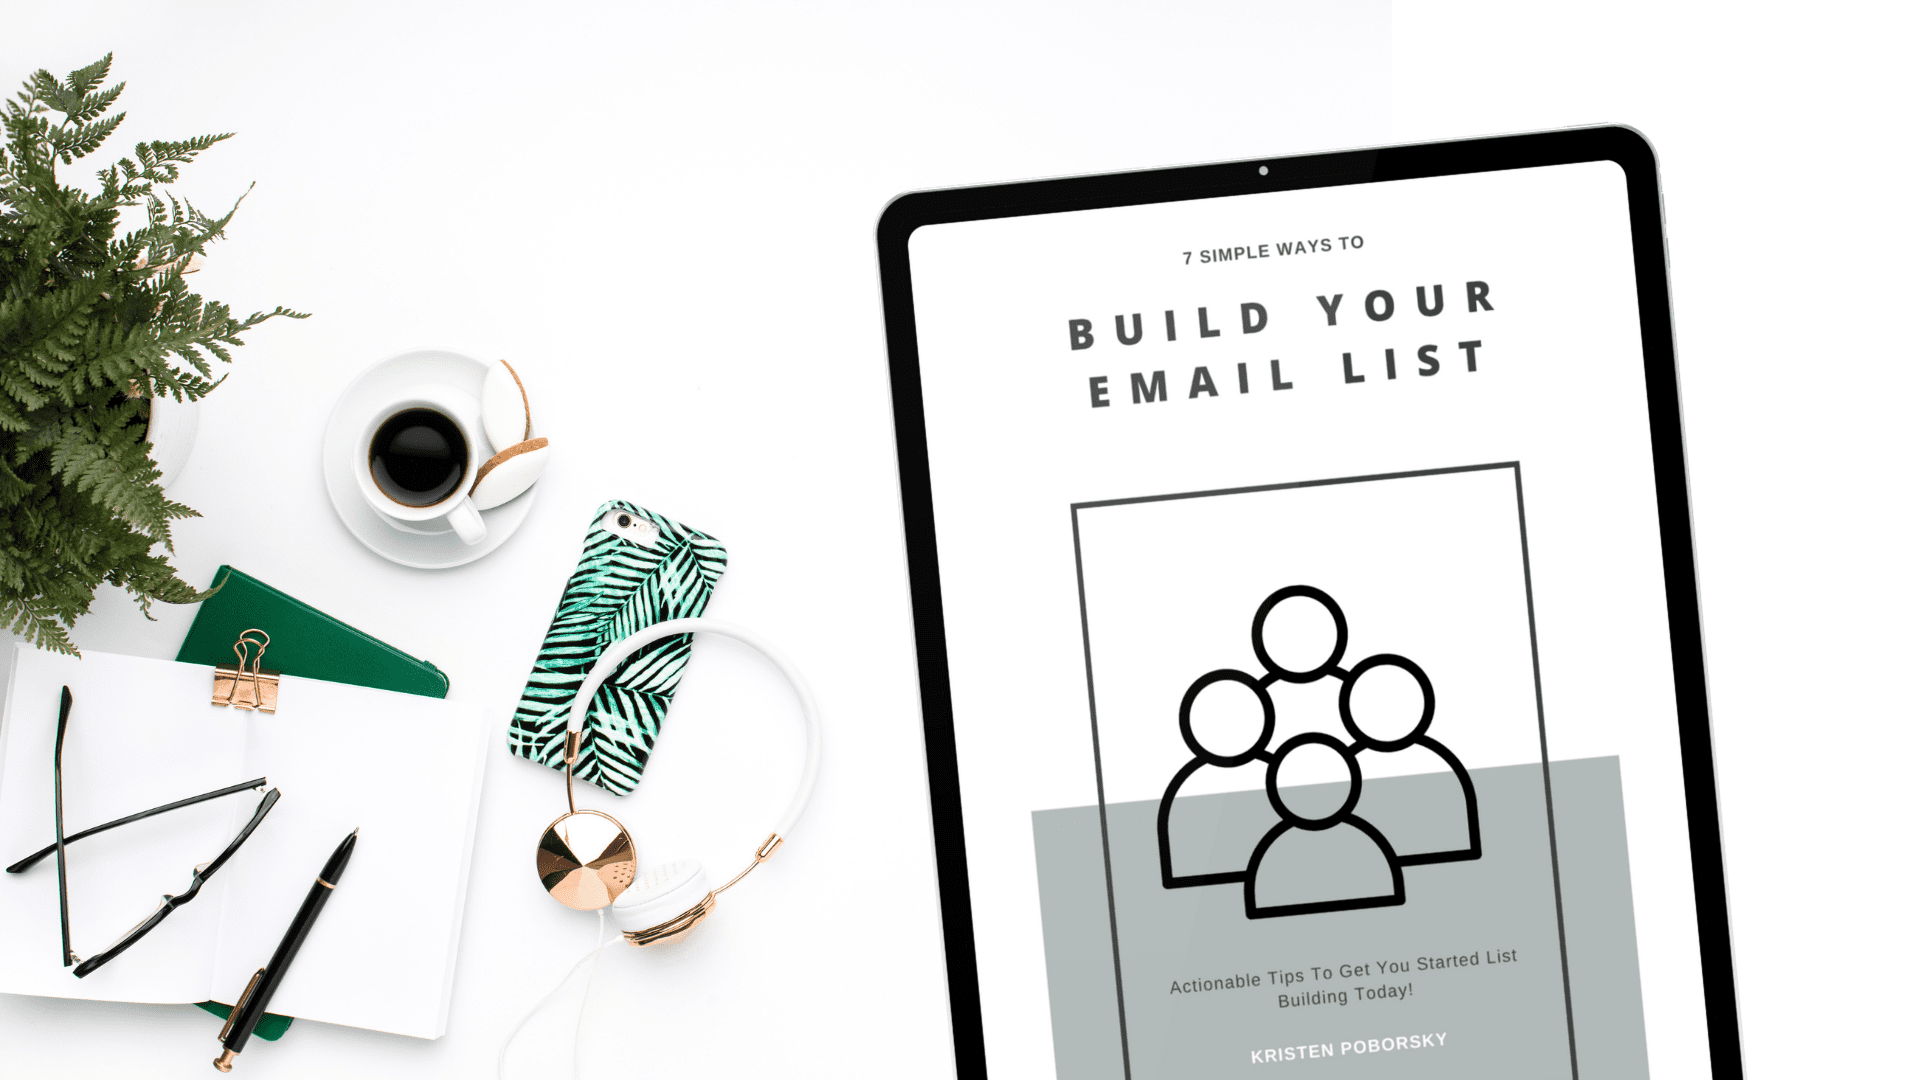 opt in: Build Your Email List